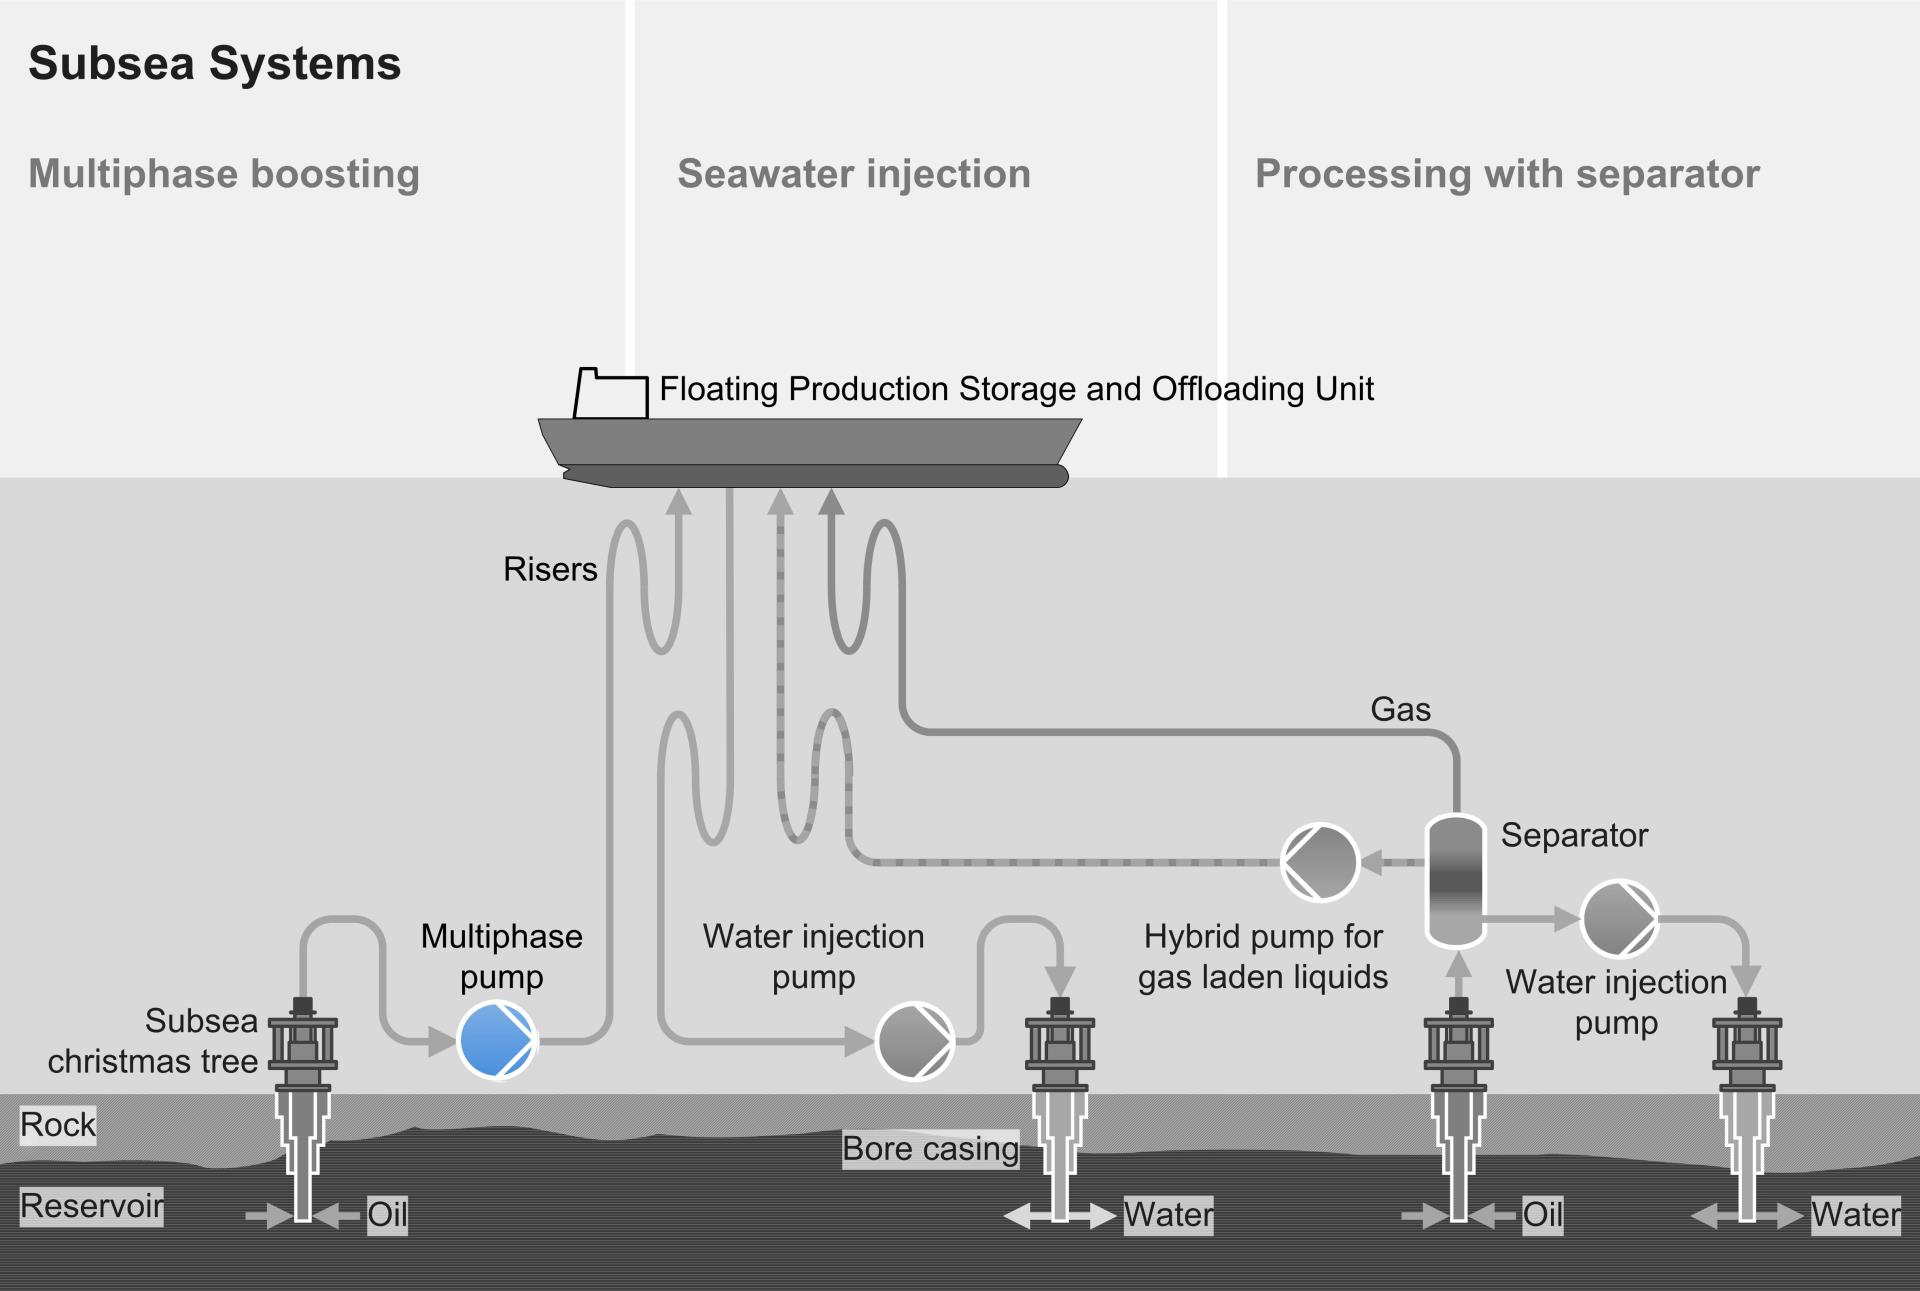 Multiphase pumping